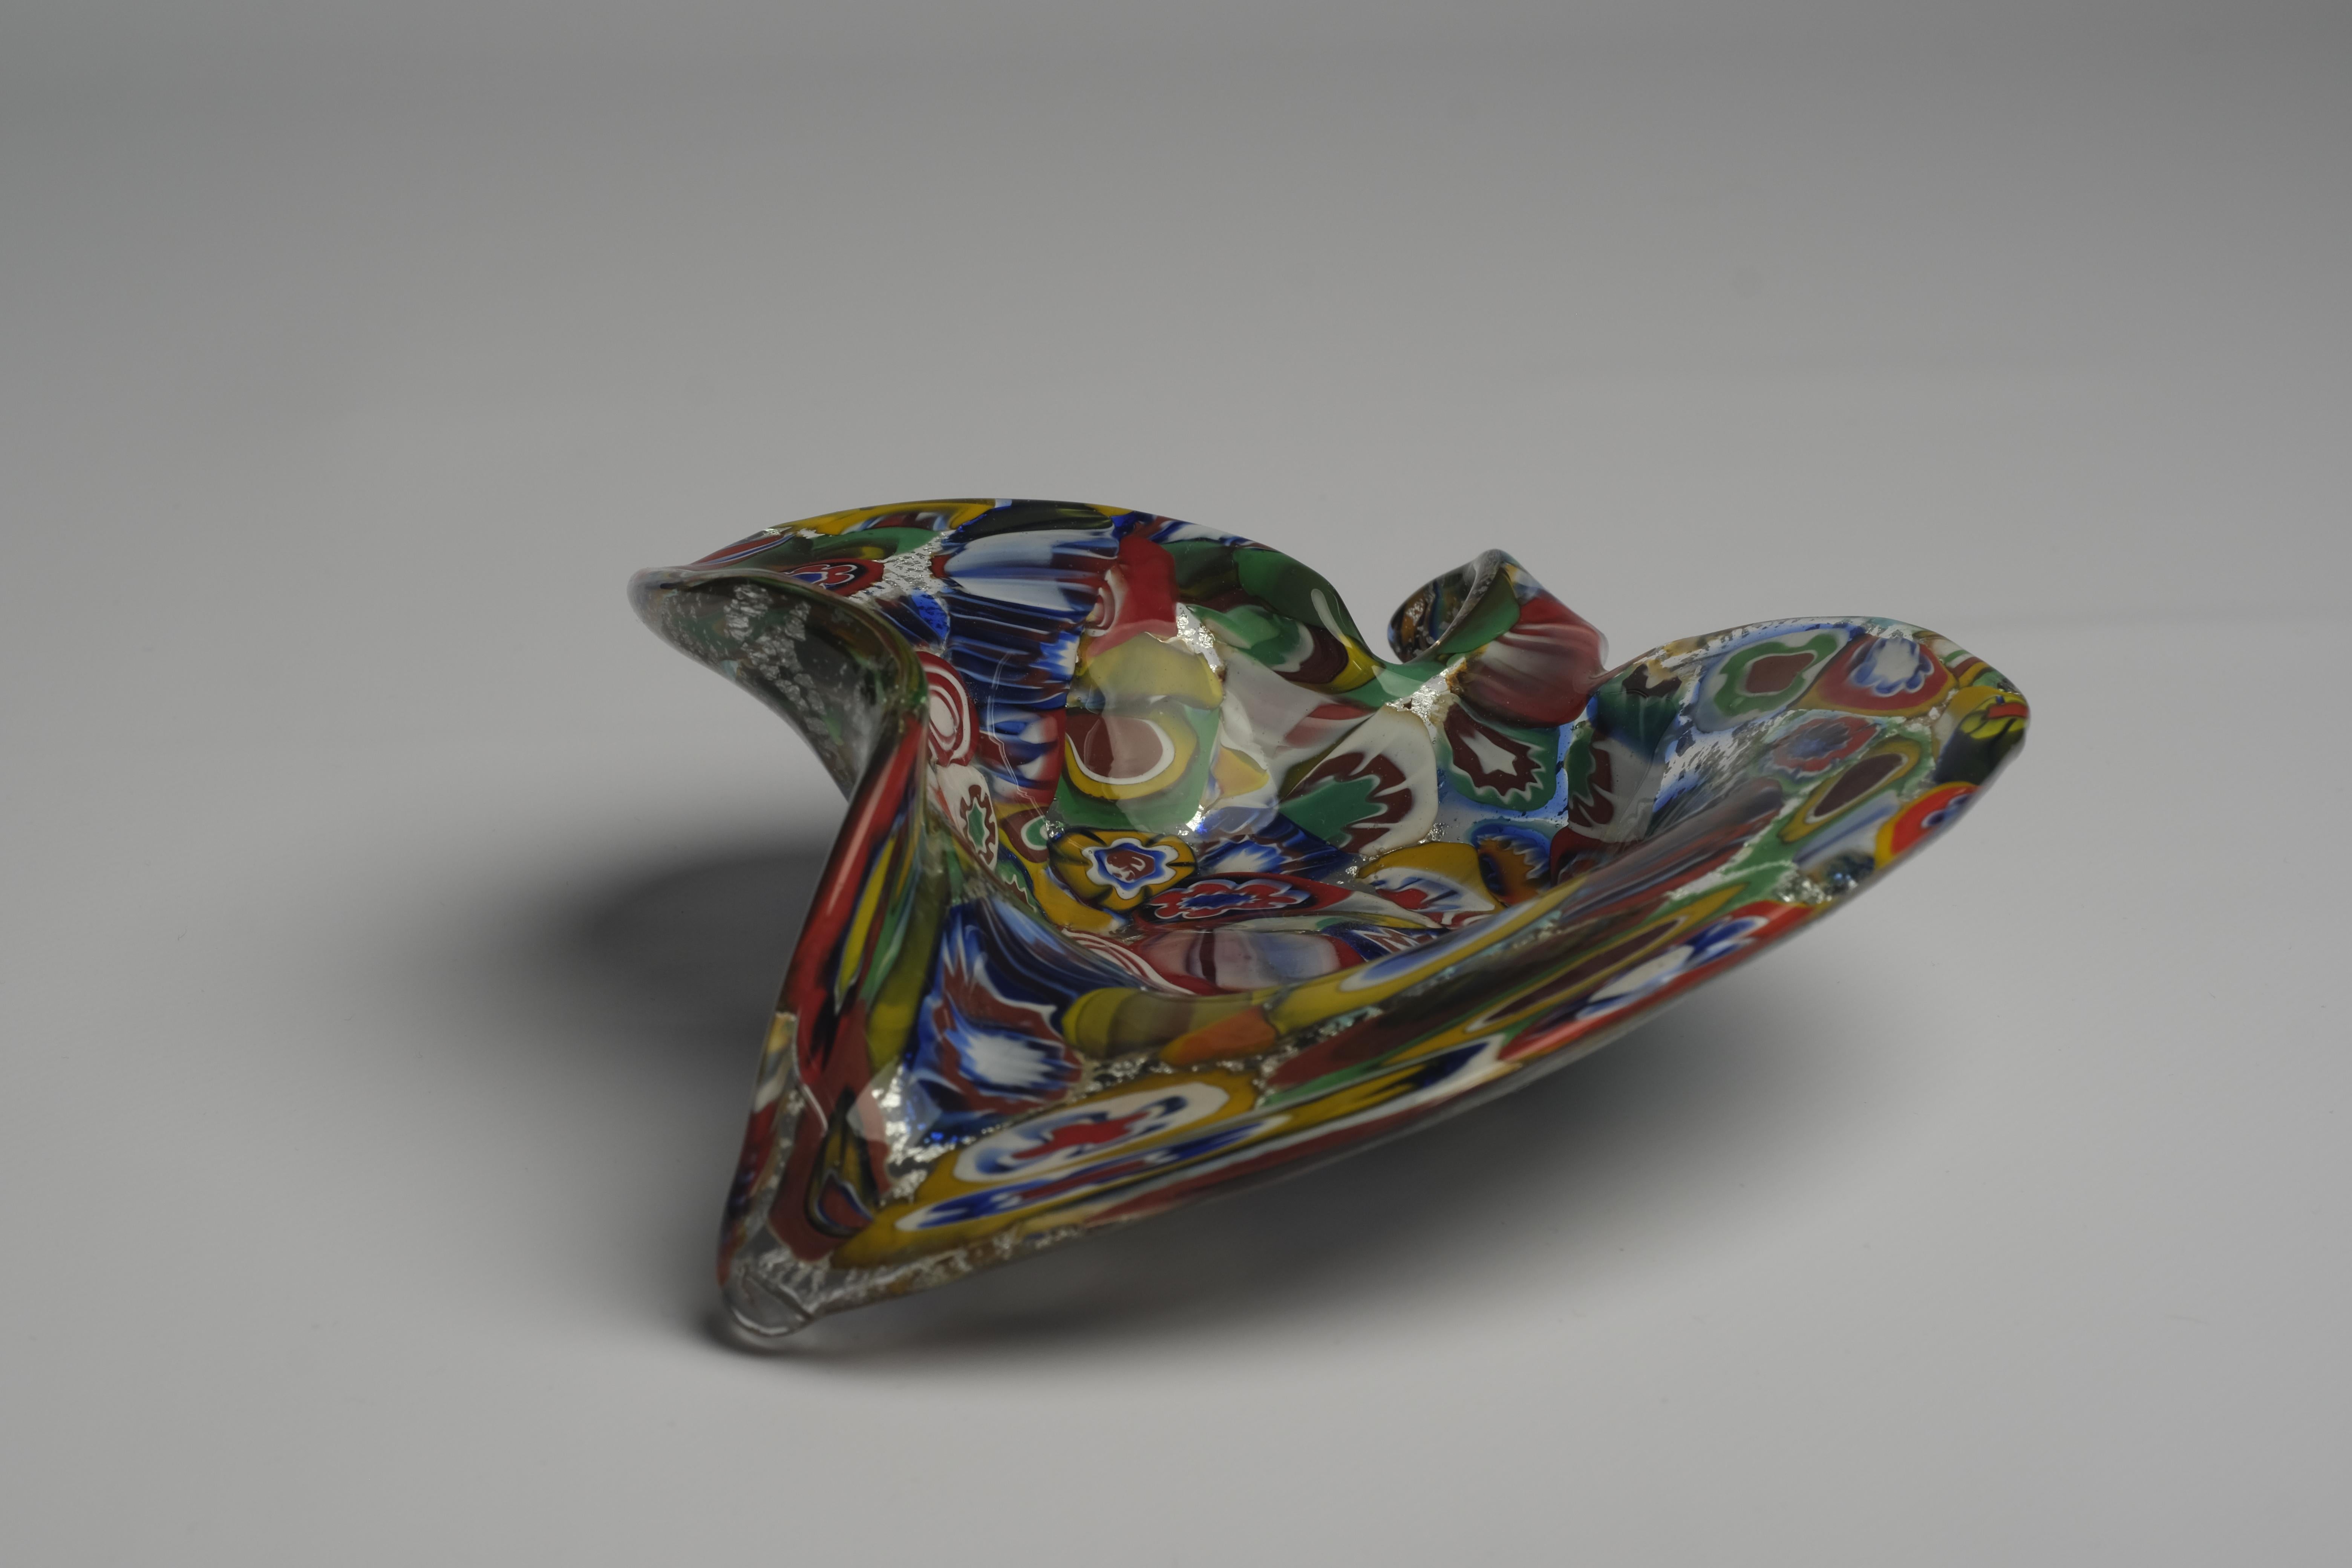 Multicolored organic leaf-like shaped millefiori Murano glass bowl, most likely by Fratelli Tosso, Italy 1950s. Stunning shape and colors, made with murrine glass technique.